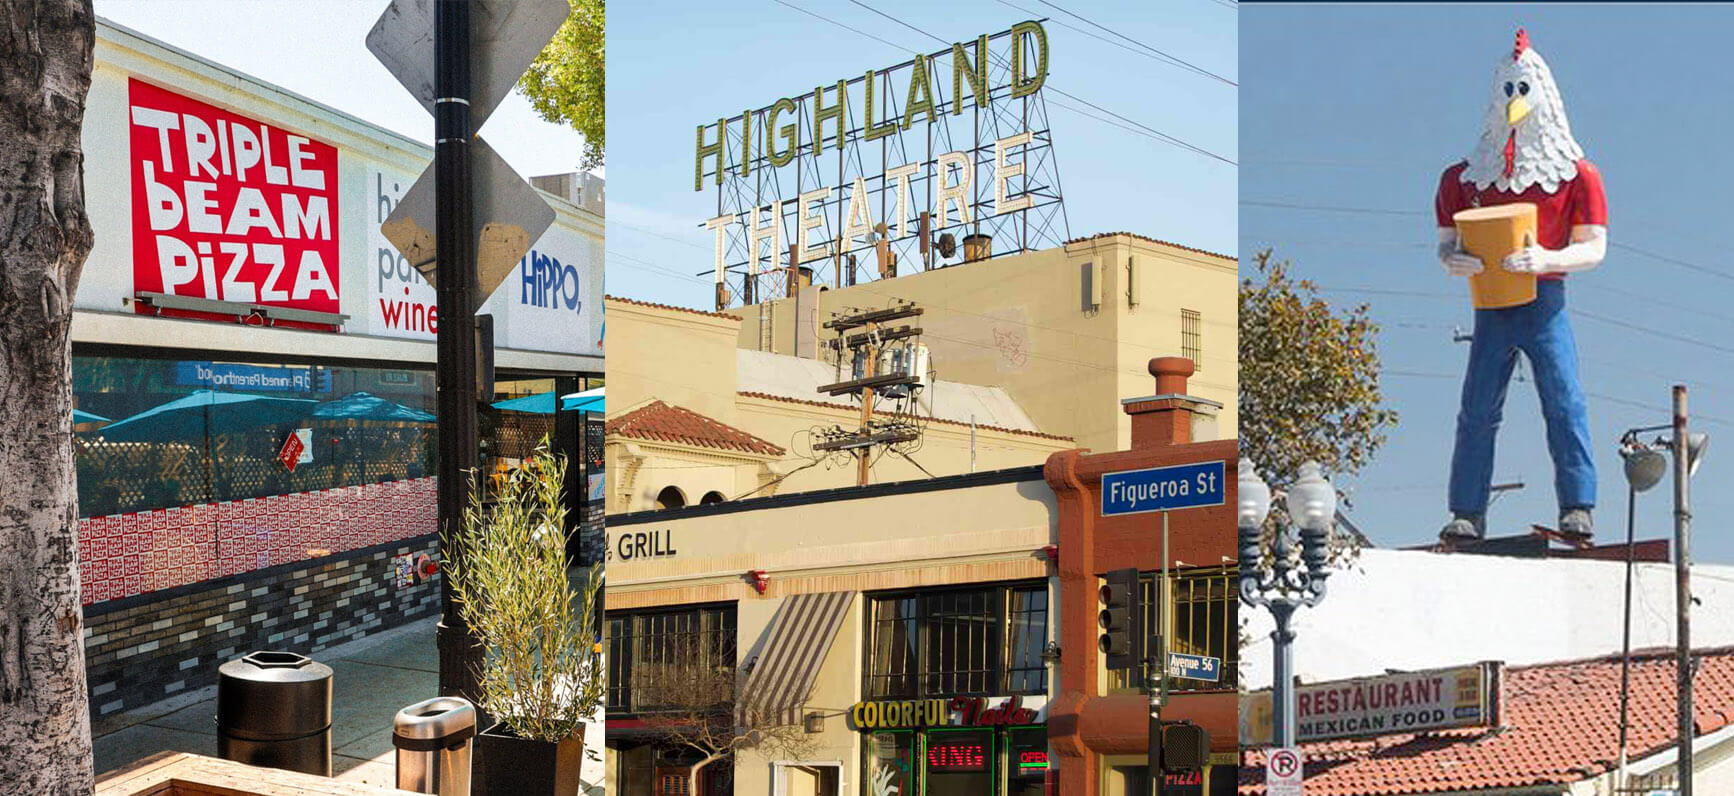 Montage of Highland Park attractions